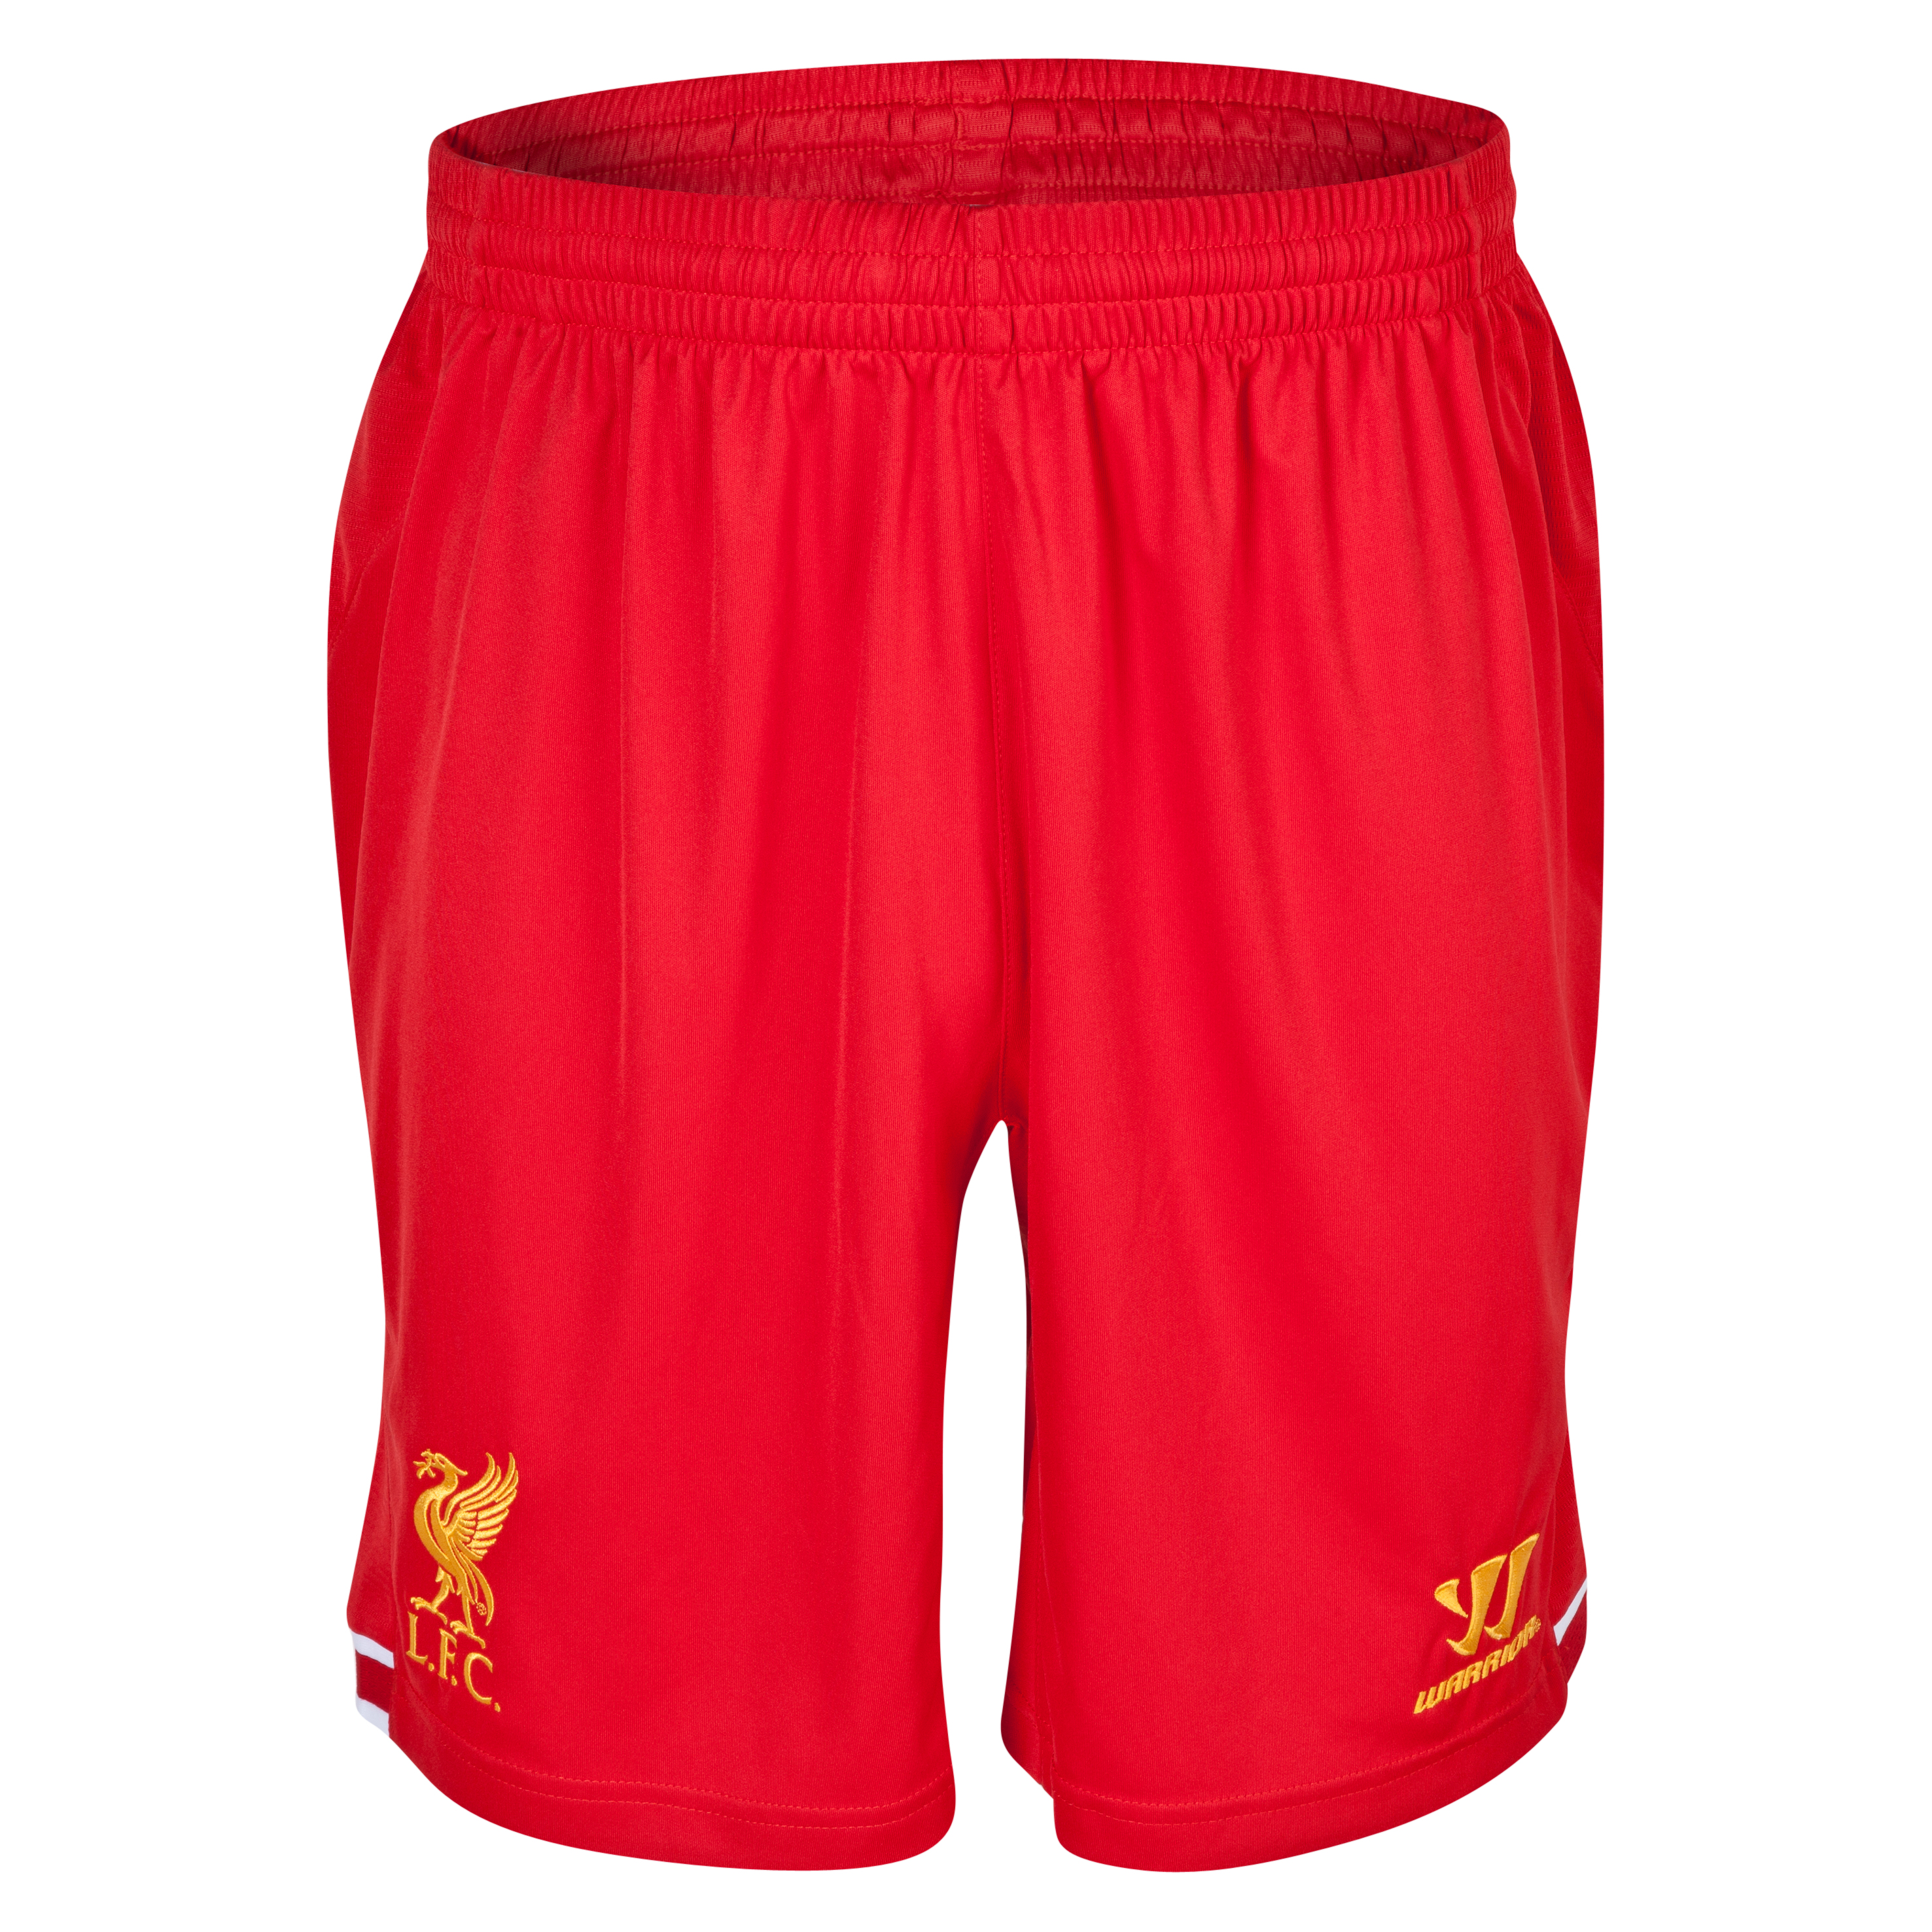 Liverpool Home Shorts 2013/14 - kids